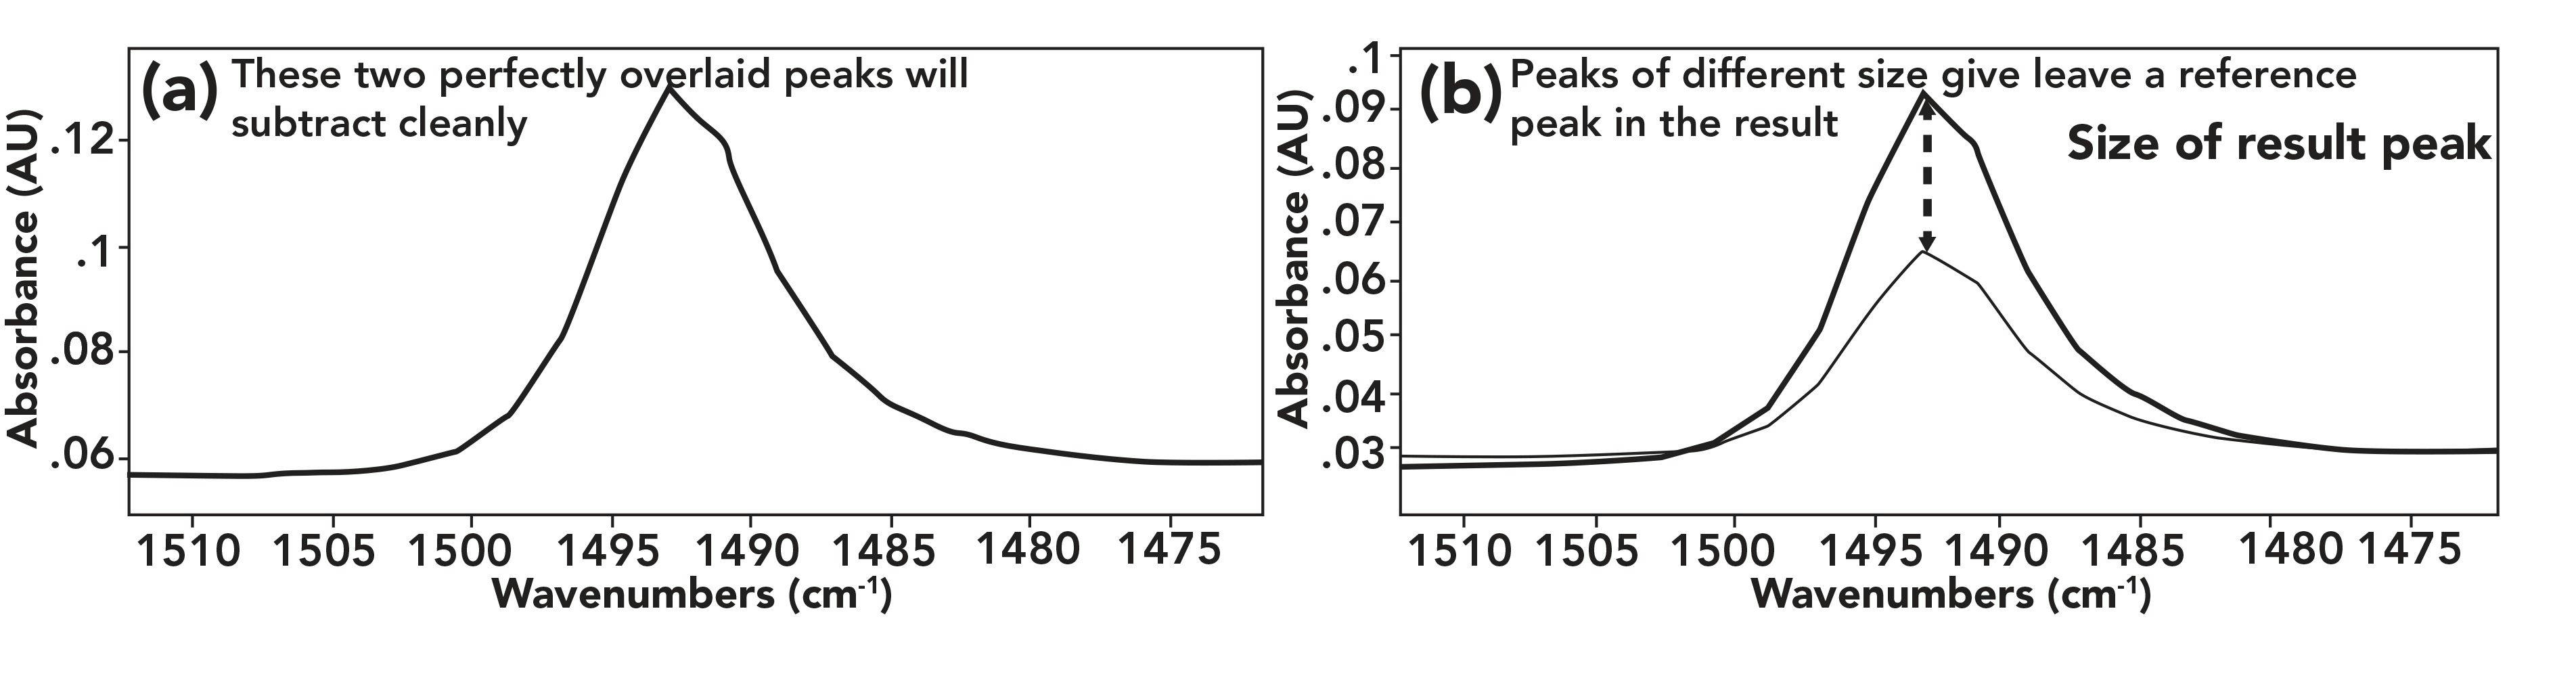 FIGURE 2: (a) Two peaks of the same size and width. These will subtract cleanly to give a flat line. (b) Two peaks of different size, when subtracted, will give a reference material peak in the result the size of the difference between the two.